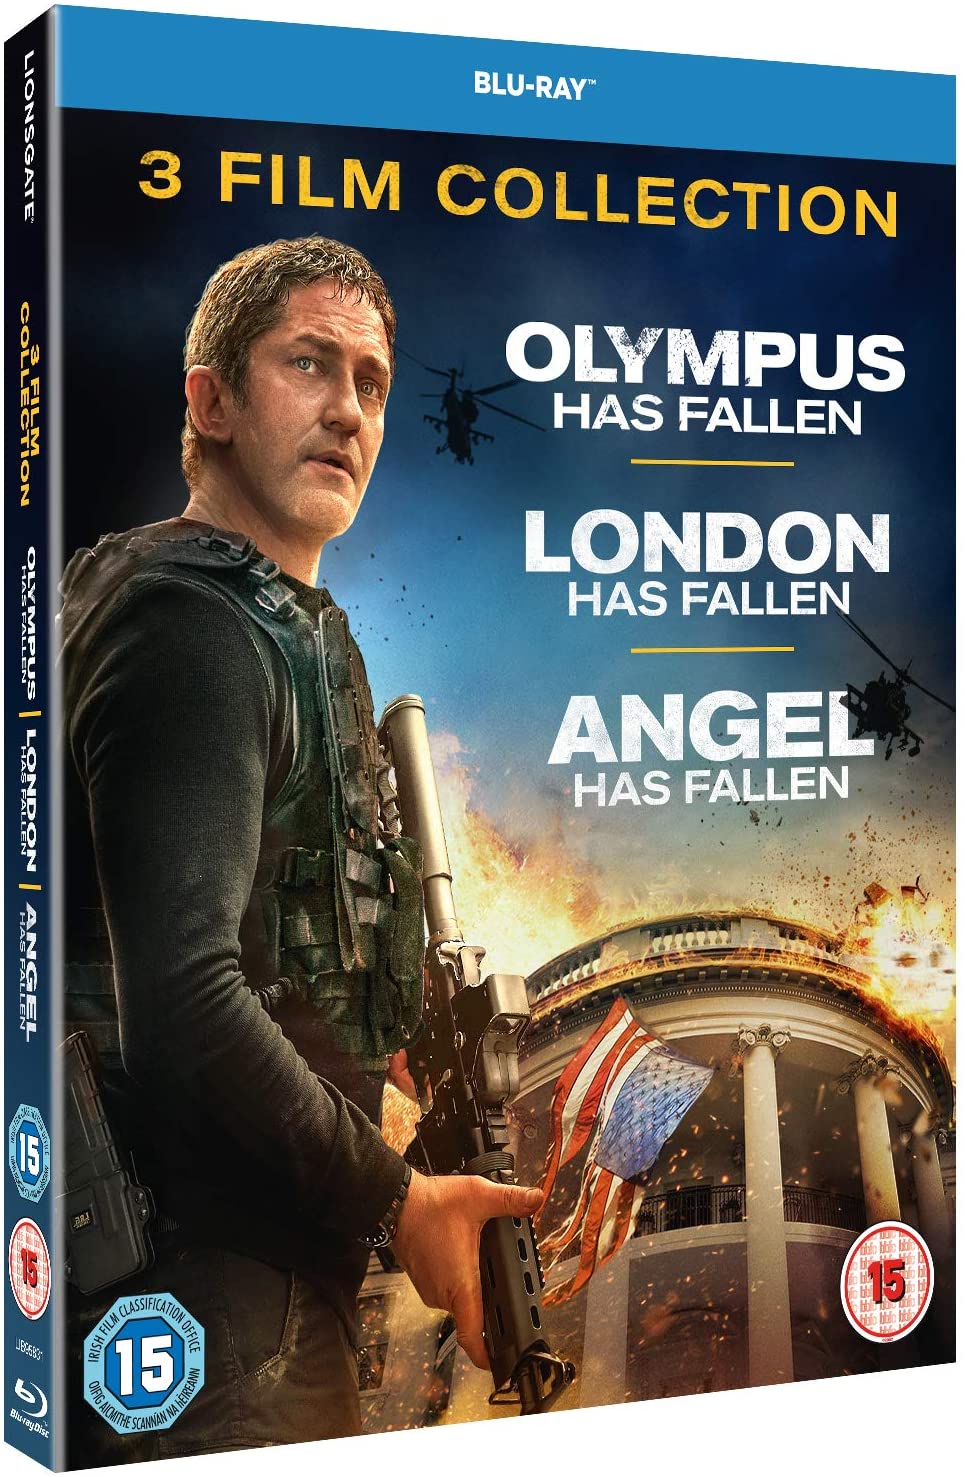 Olympus / London / Angel Has Fallen Triple Film Collection - Action [Blu-ray]